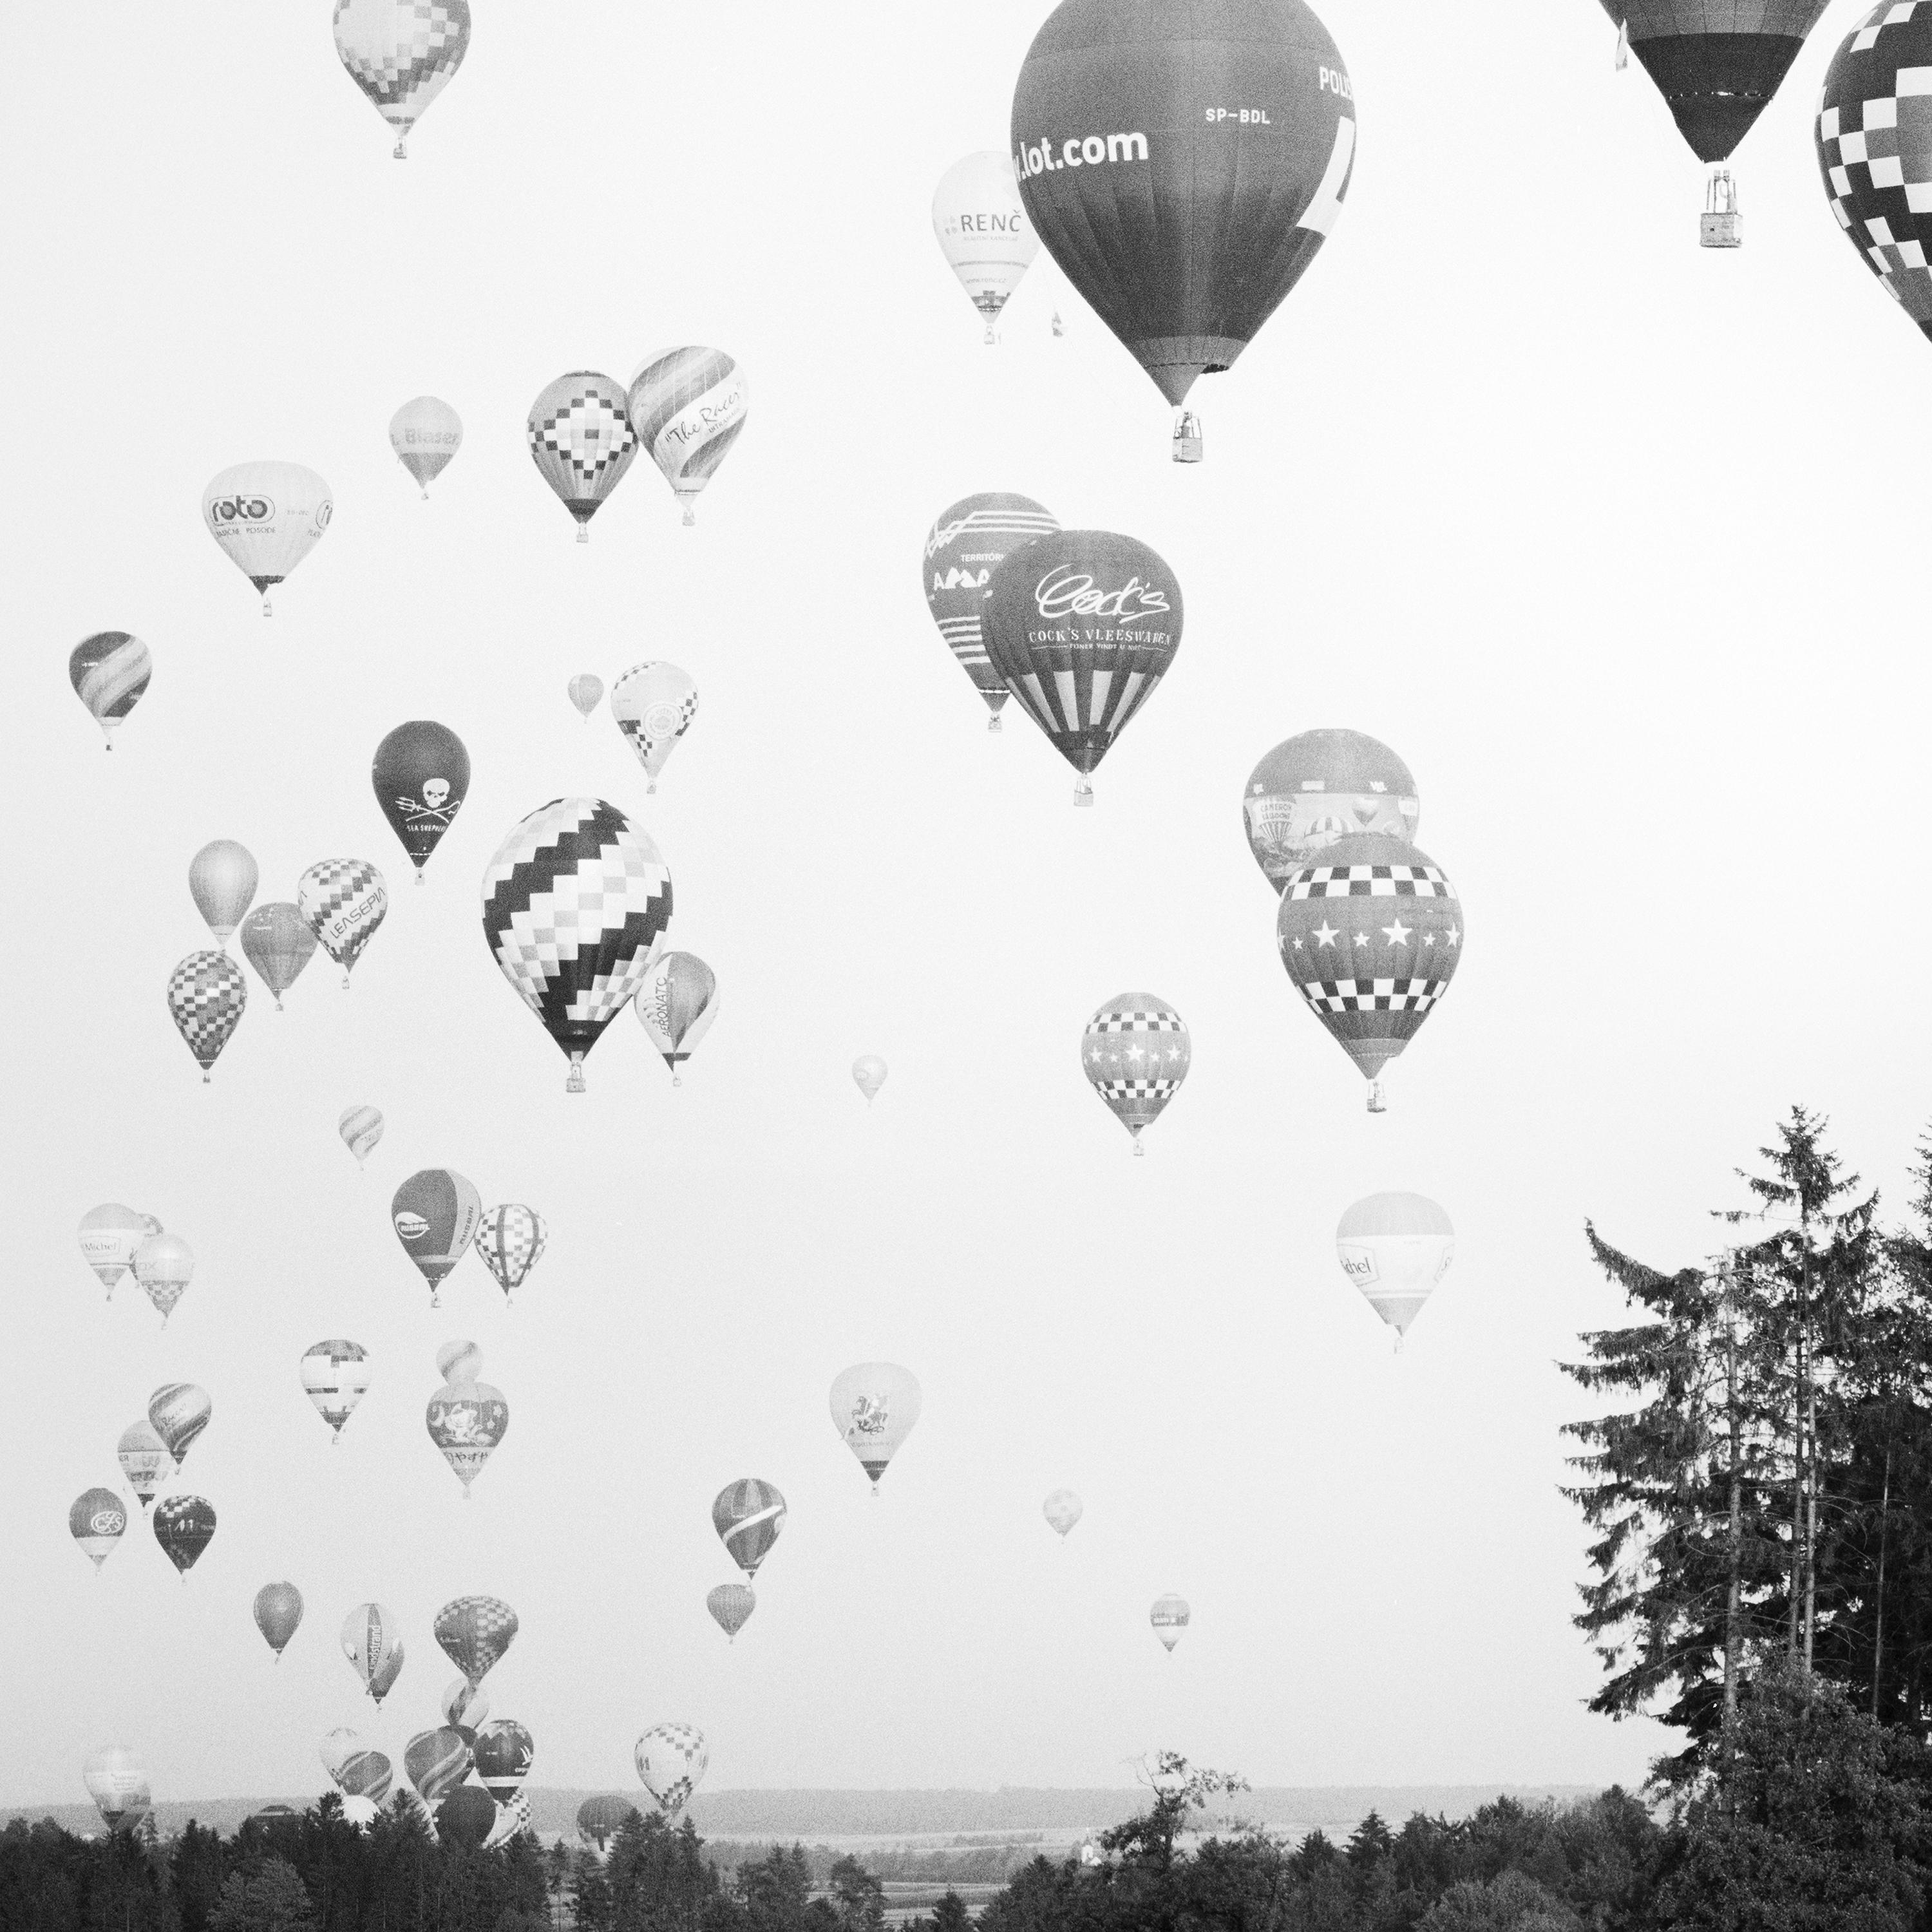 Hot Air Balloon World Championship, black and white art landscape photography For Sale 4